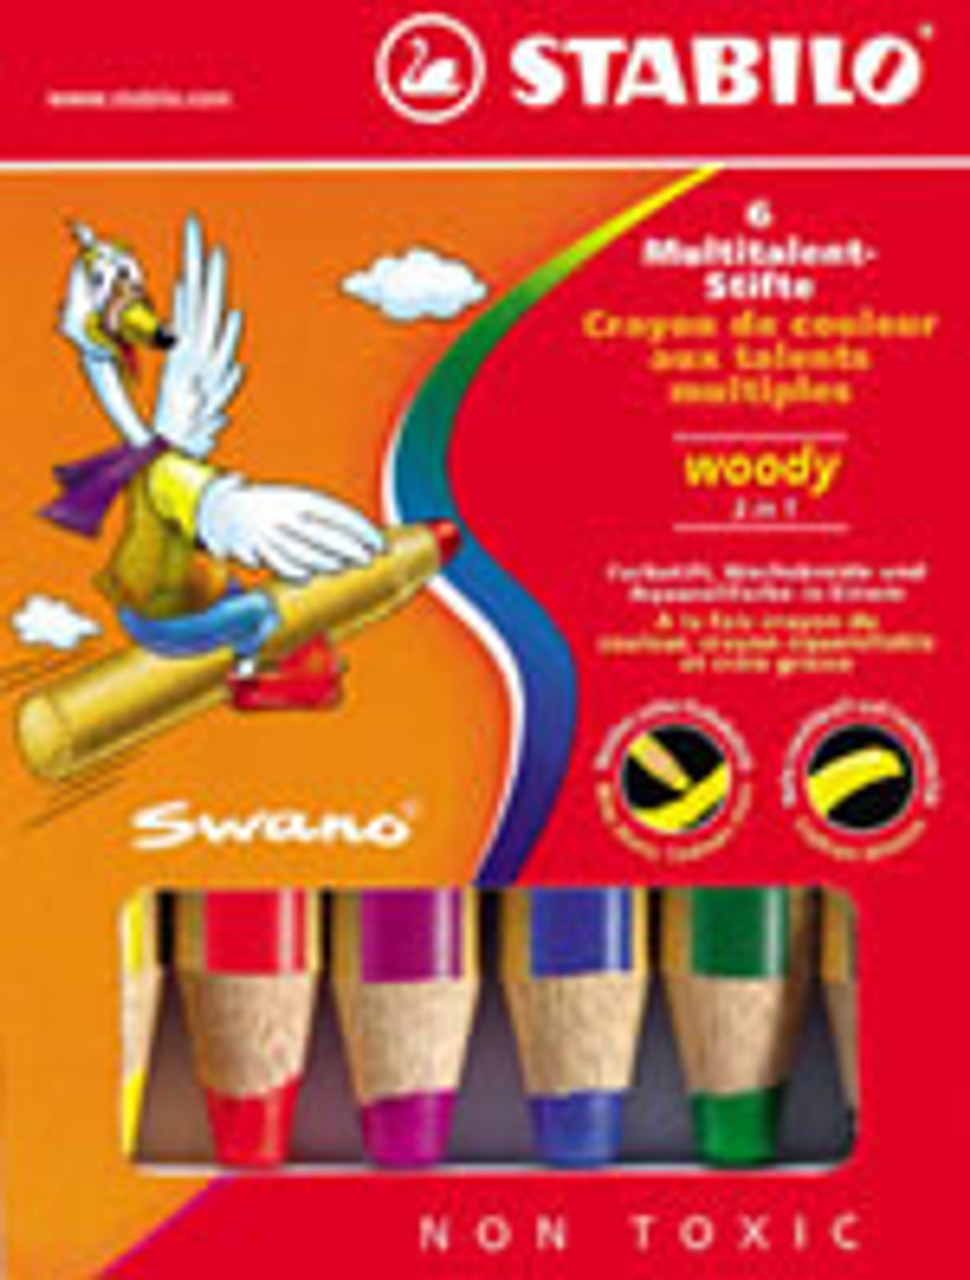 How to use Stabilo Woody crayons 